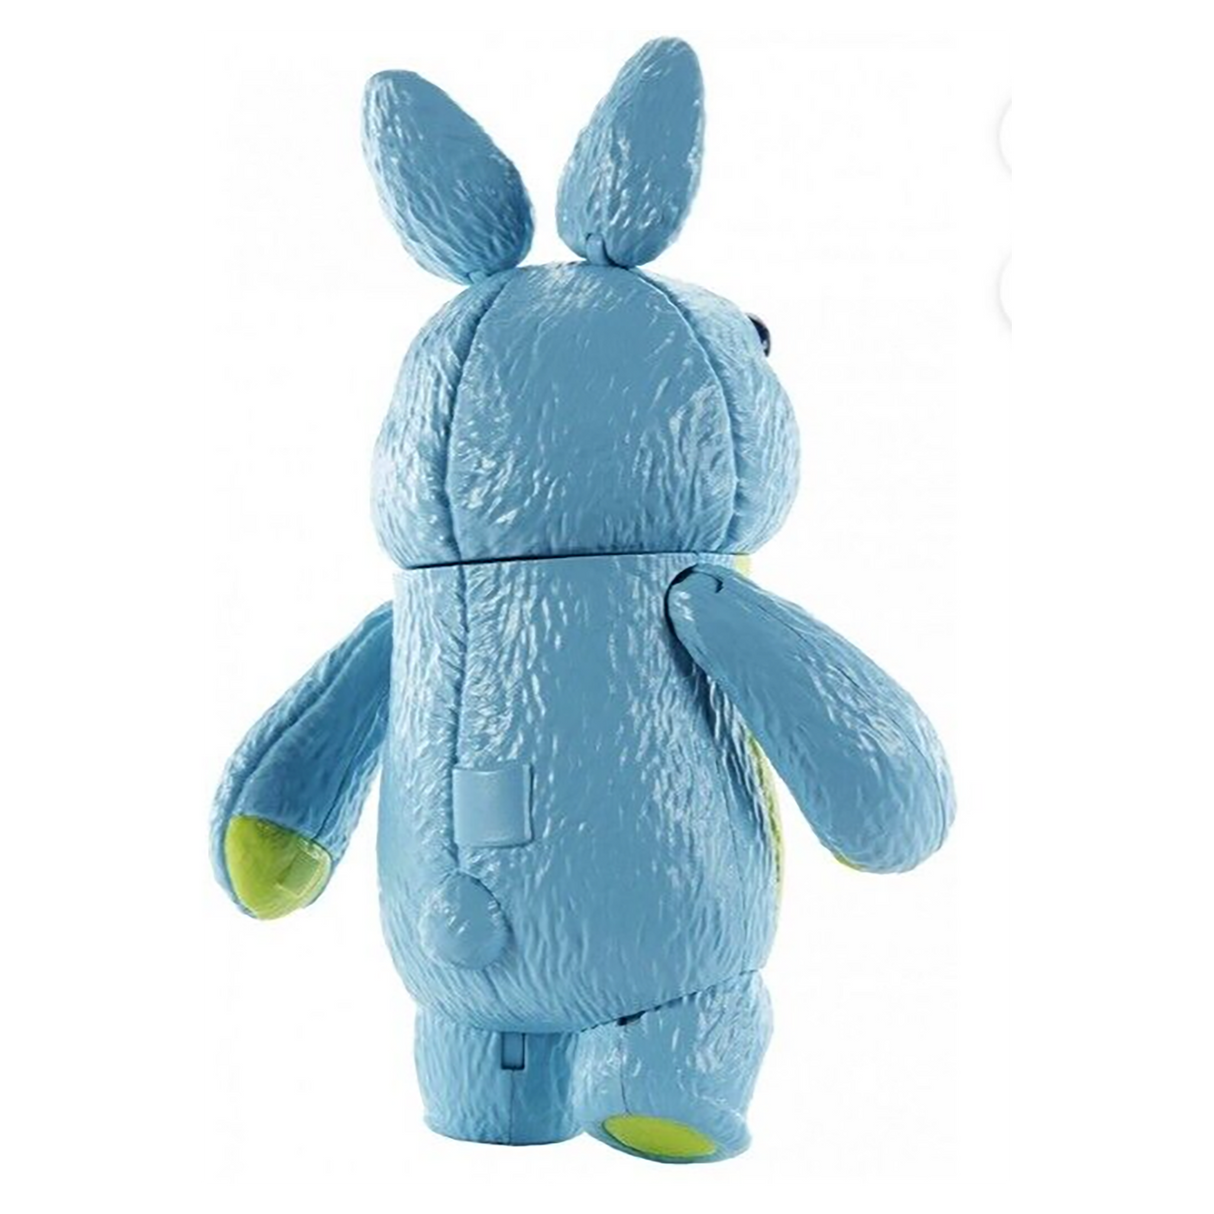 Disney Pixar Toy Story Bunny 9 inch Figure with Movie-Inspired Details